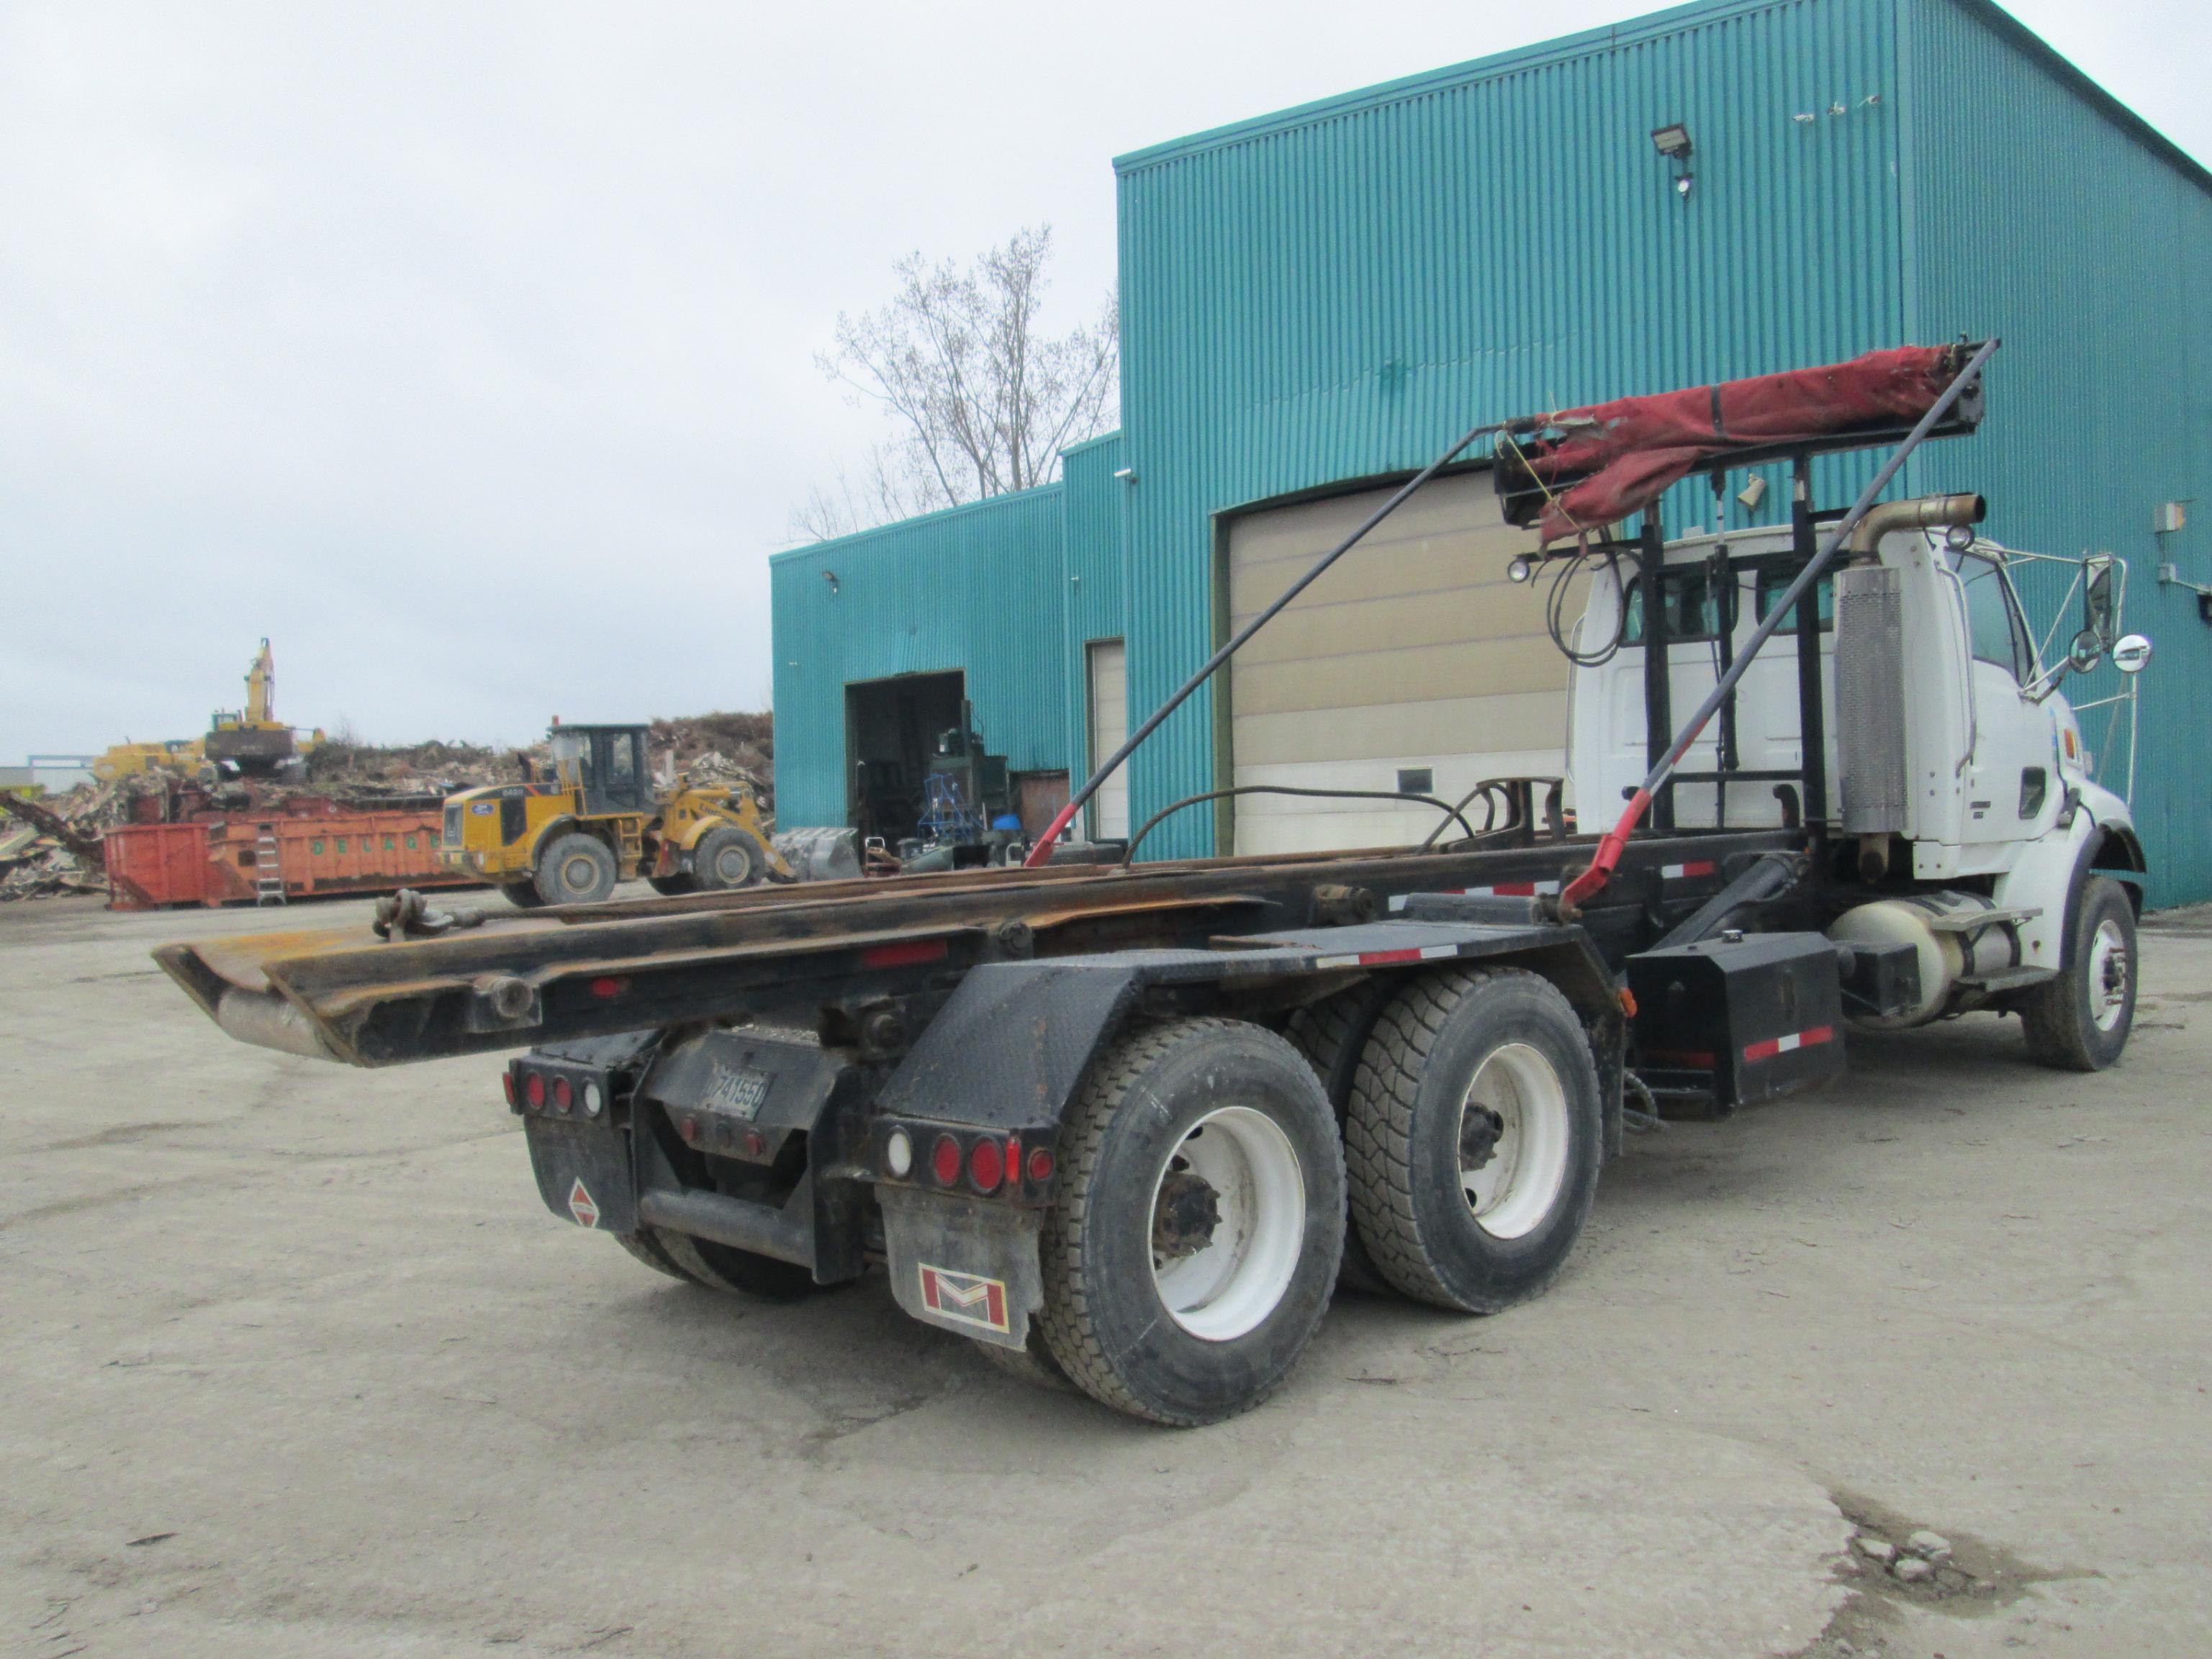 ROLLOFF TRUCK 2005 Sterling L-Line Tandem / axle Roll off truck SN 2FZHAZCV45AN71985, equipped with